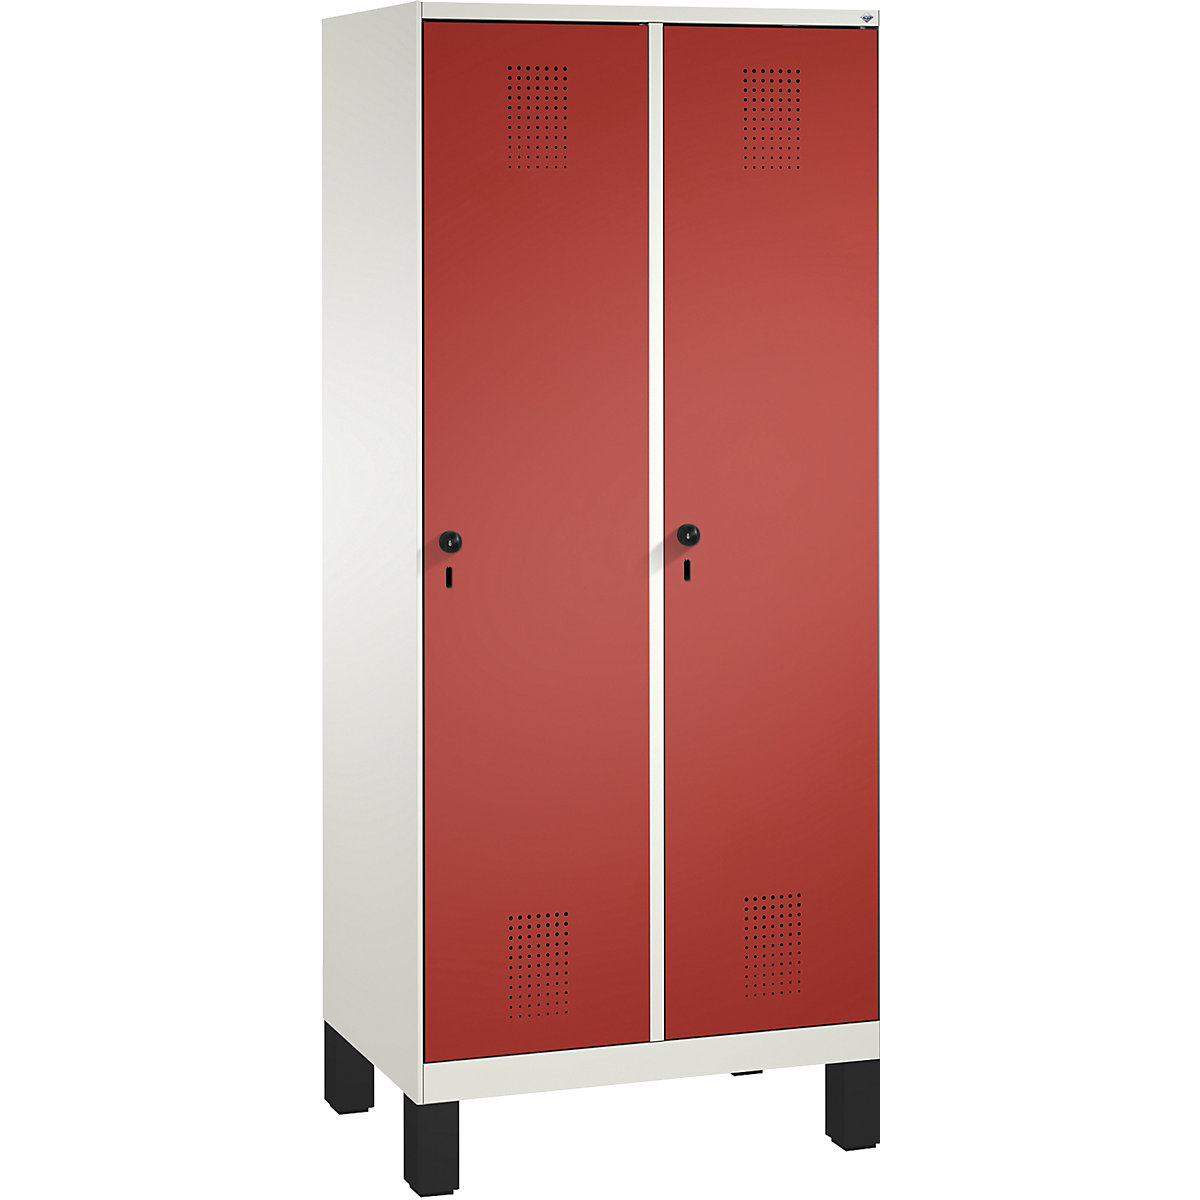 EVOLO cloakroom locker, with feet – C+P, 2 compartments, compartment width 400 mm, traffic white / flame red-11